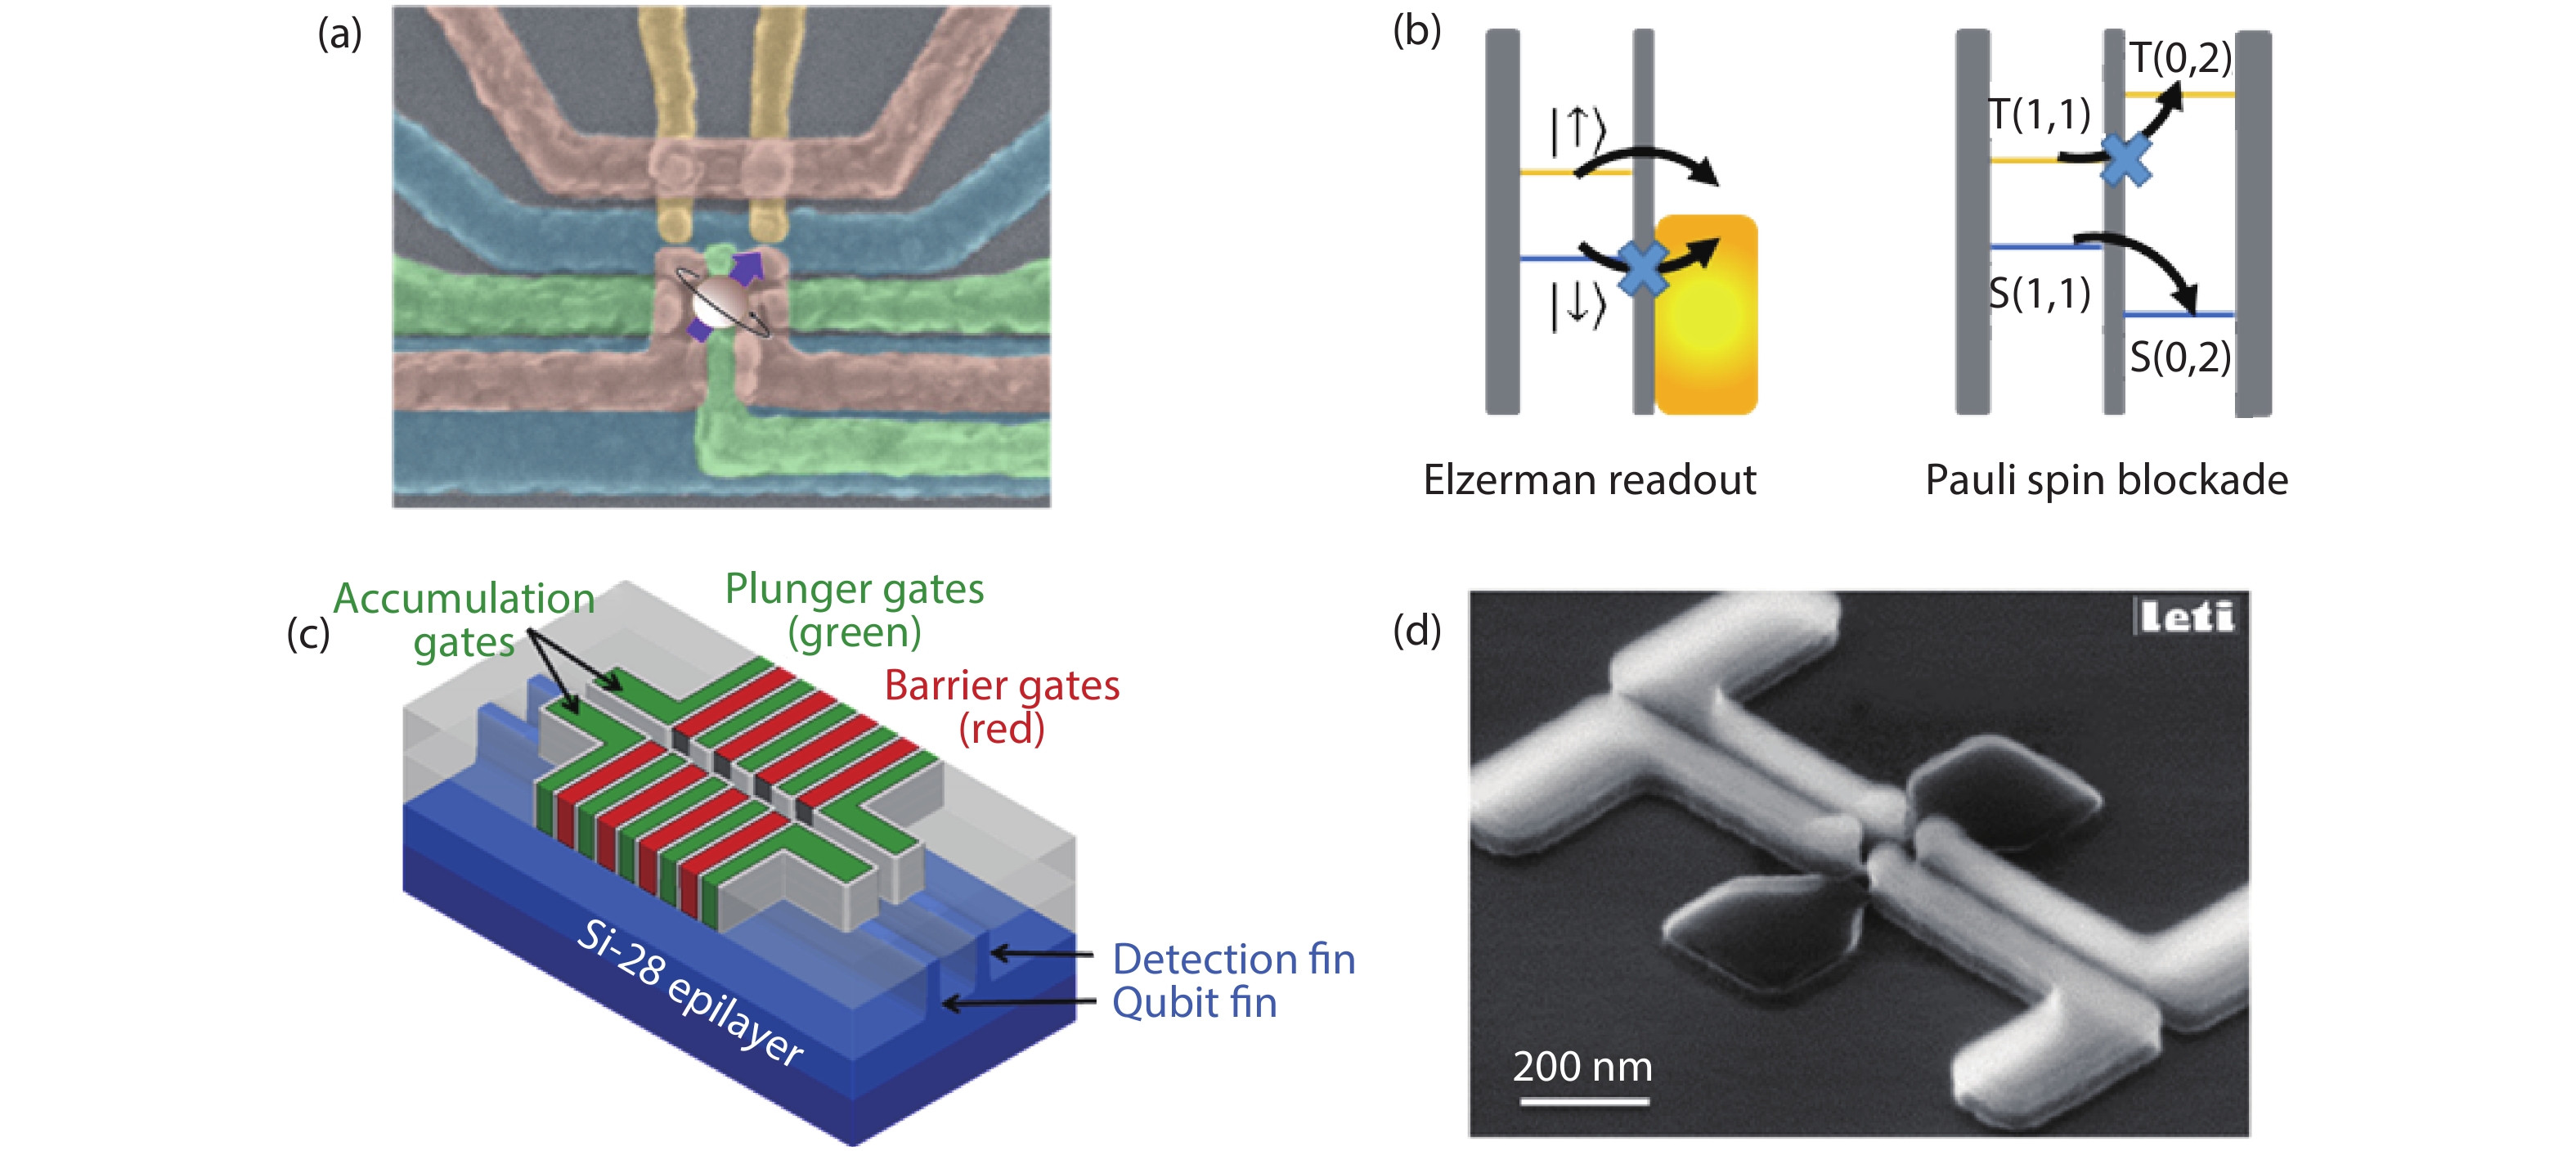 (Color online) (a) False-color scanning electron microscopy (SEM) image of an overlapping-gate Si QD. (b) Energy level arrangement for Elezerman readout and Pauli spin blockade readout. (c) Dual nested gate integration of Si QDs using fin field-effect transistor (FinFET) technology. (d) SEM image of a two dimensional array of Si QDs using fully-depleted silicon-on-insulator transistor (FD-SOI) technology.